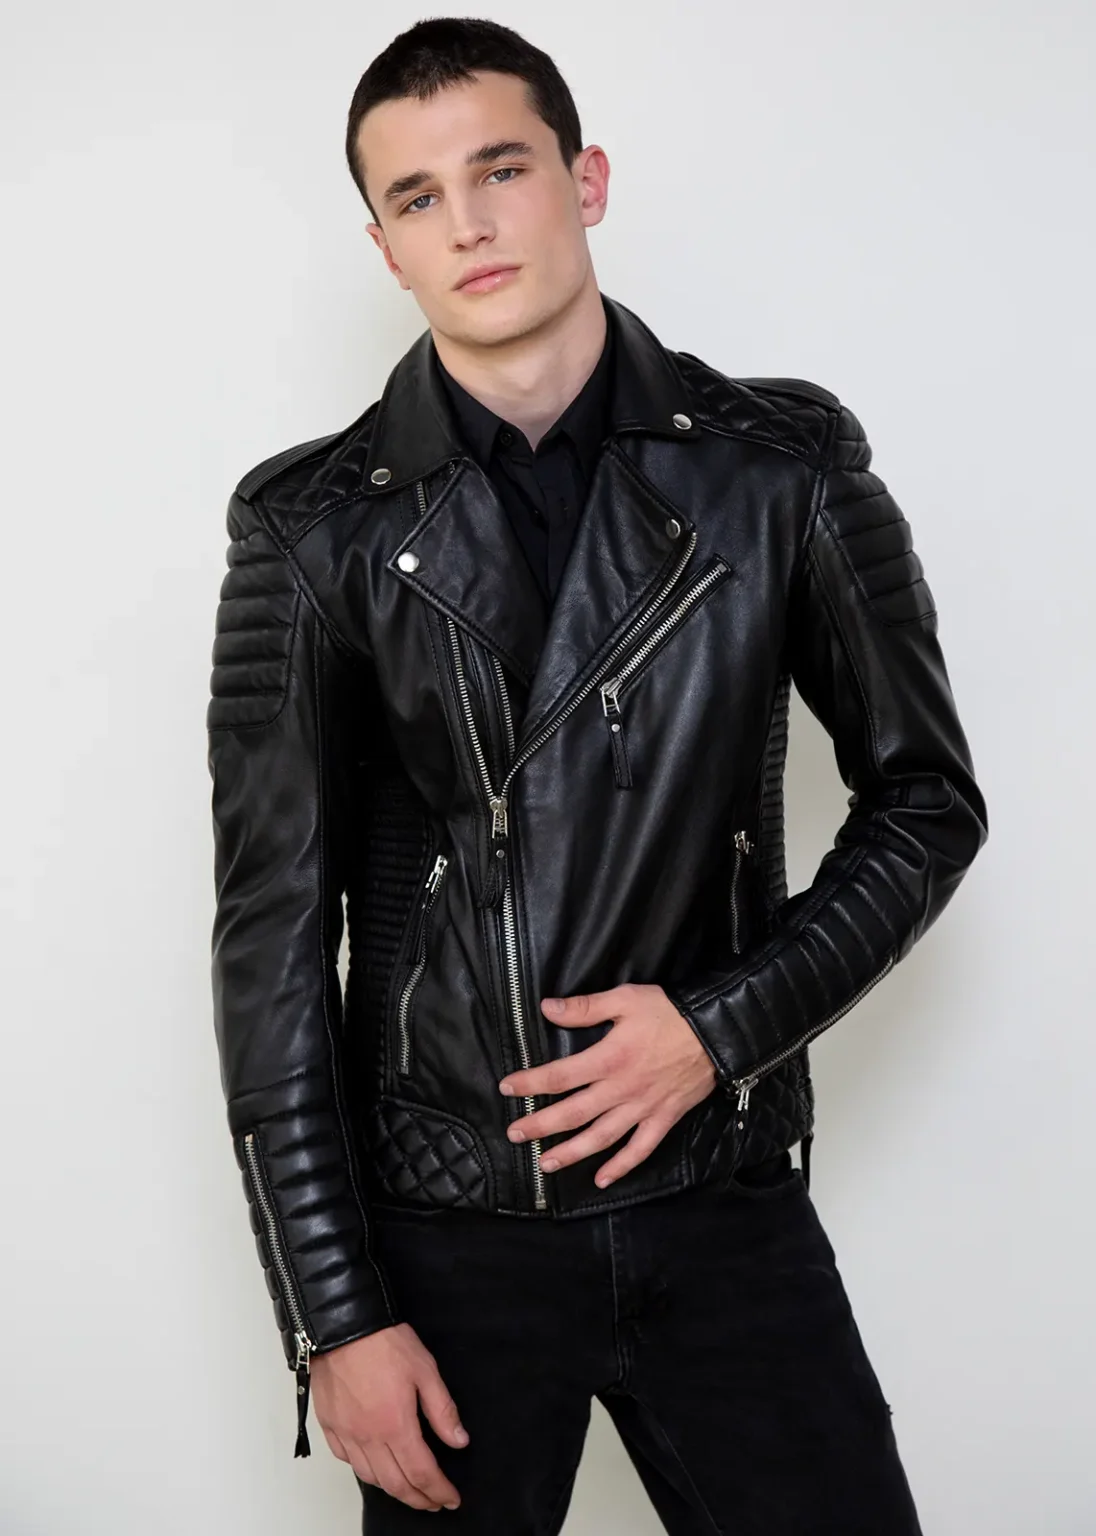 Buy Mens Quilted Black Leather Motorcycle Jacket | LucaJackets